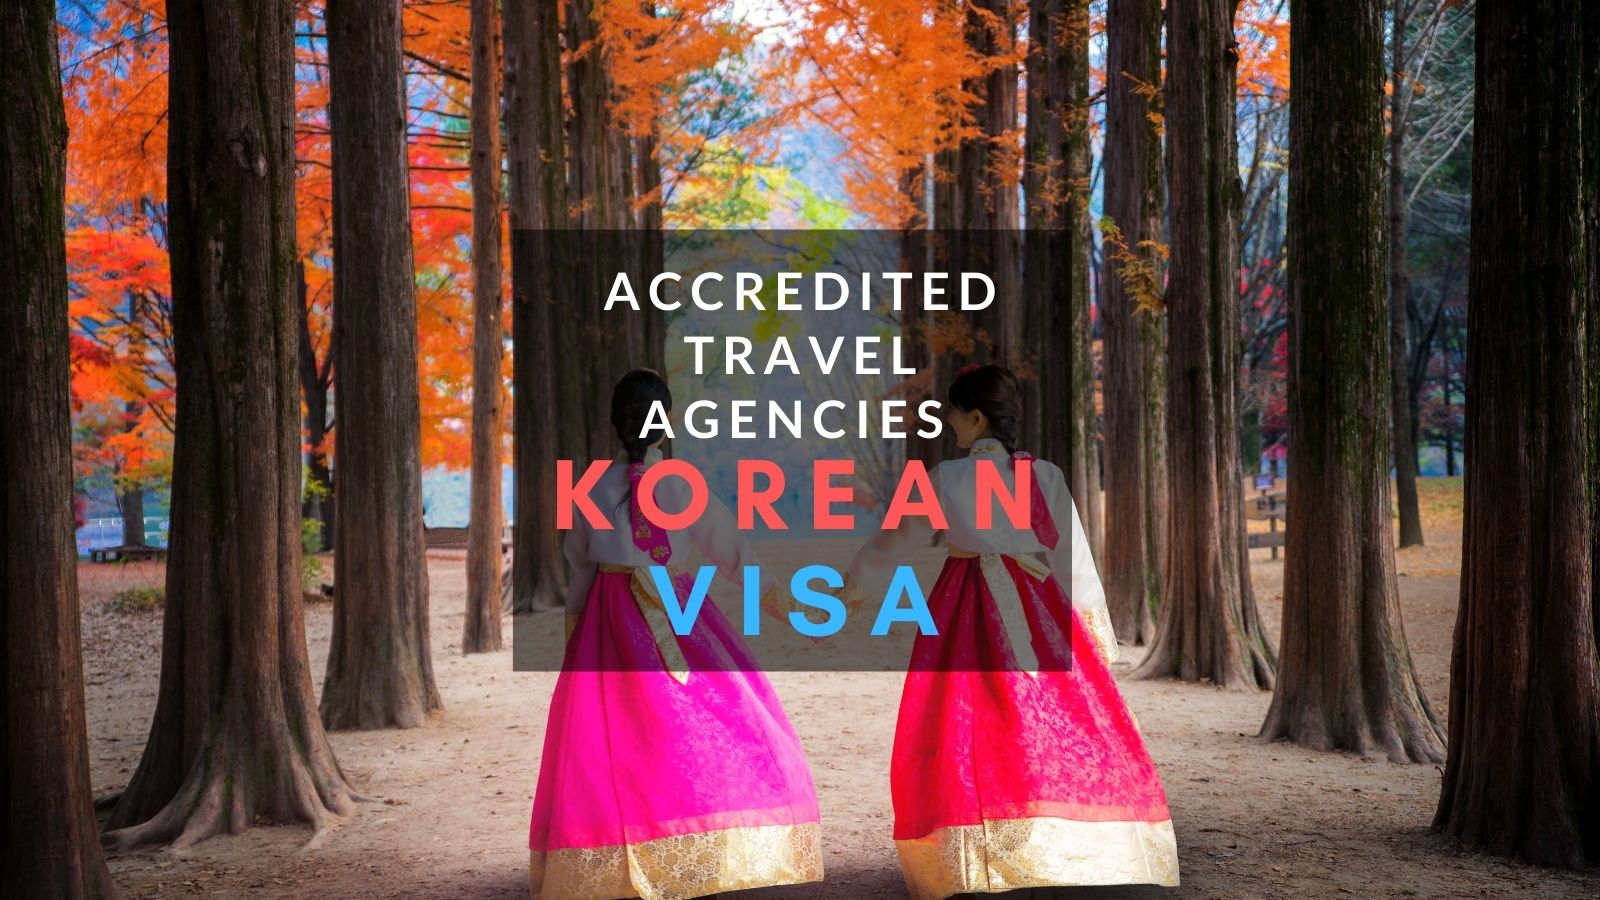 list of accredited travel agencies for korean tourist visa application philippines